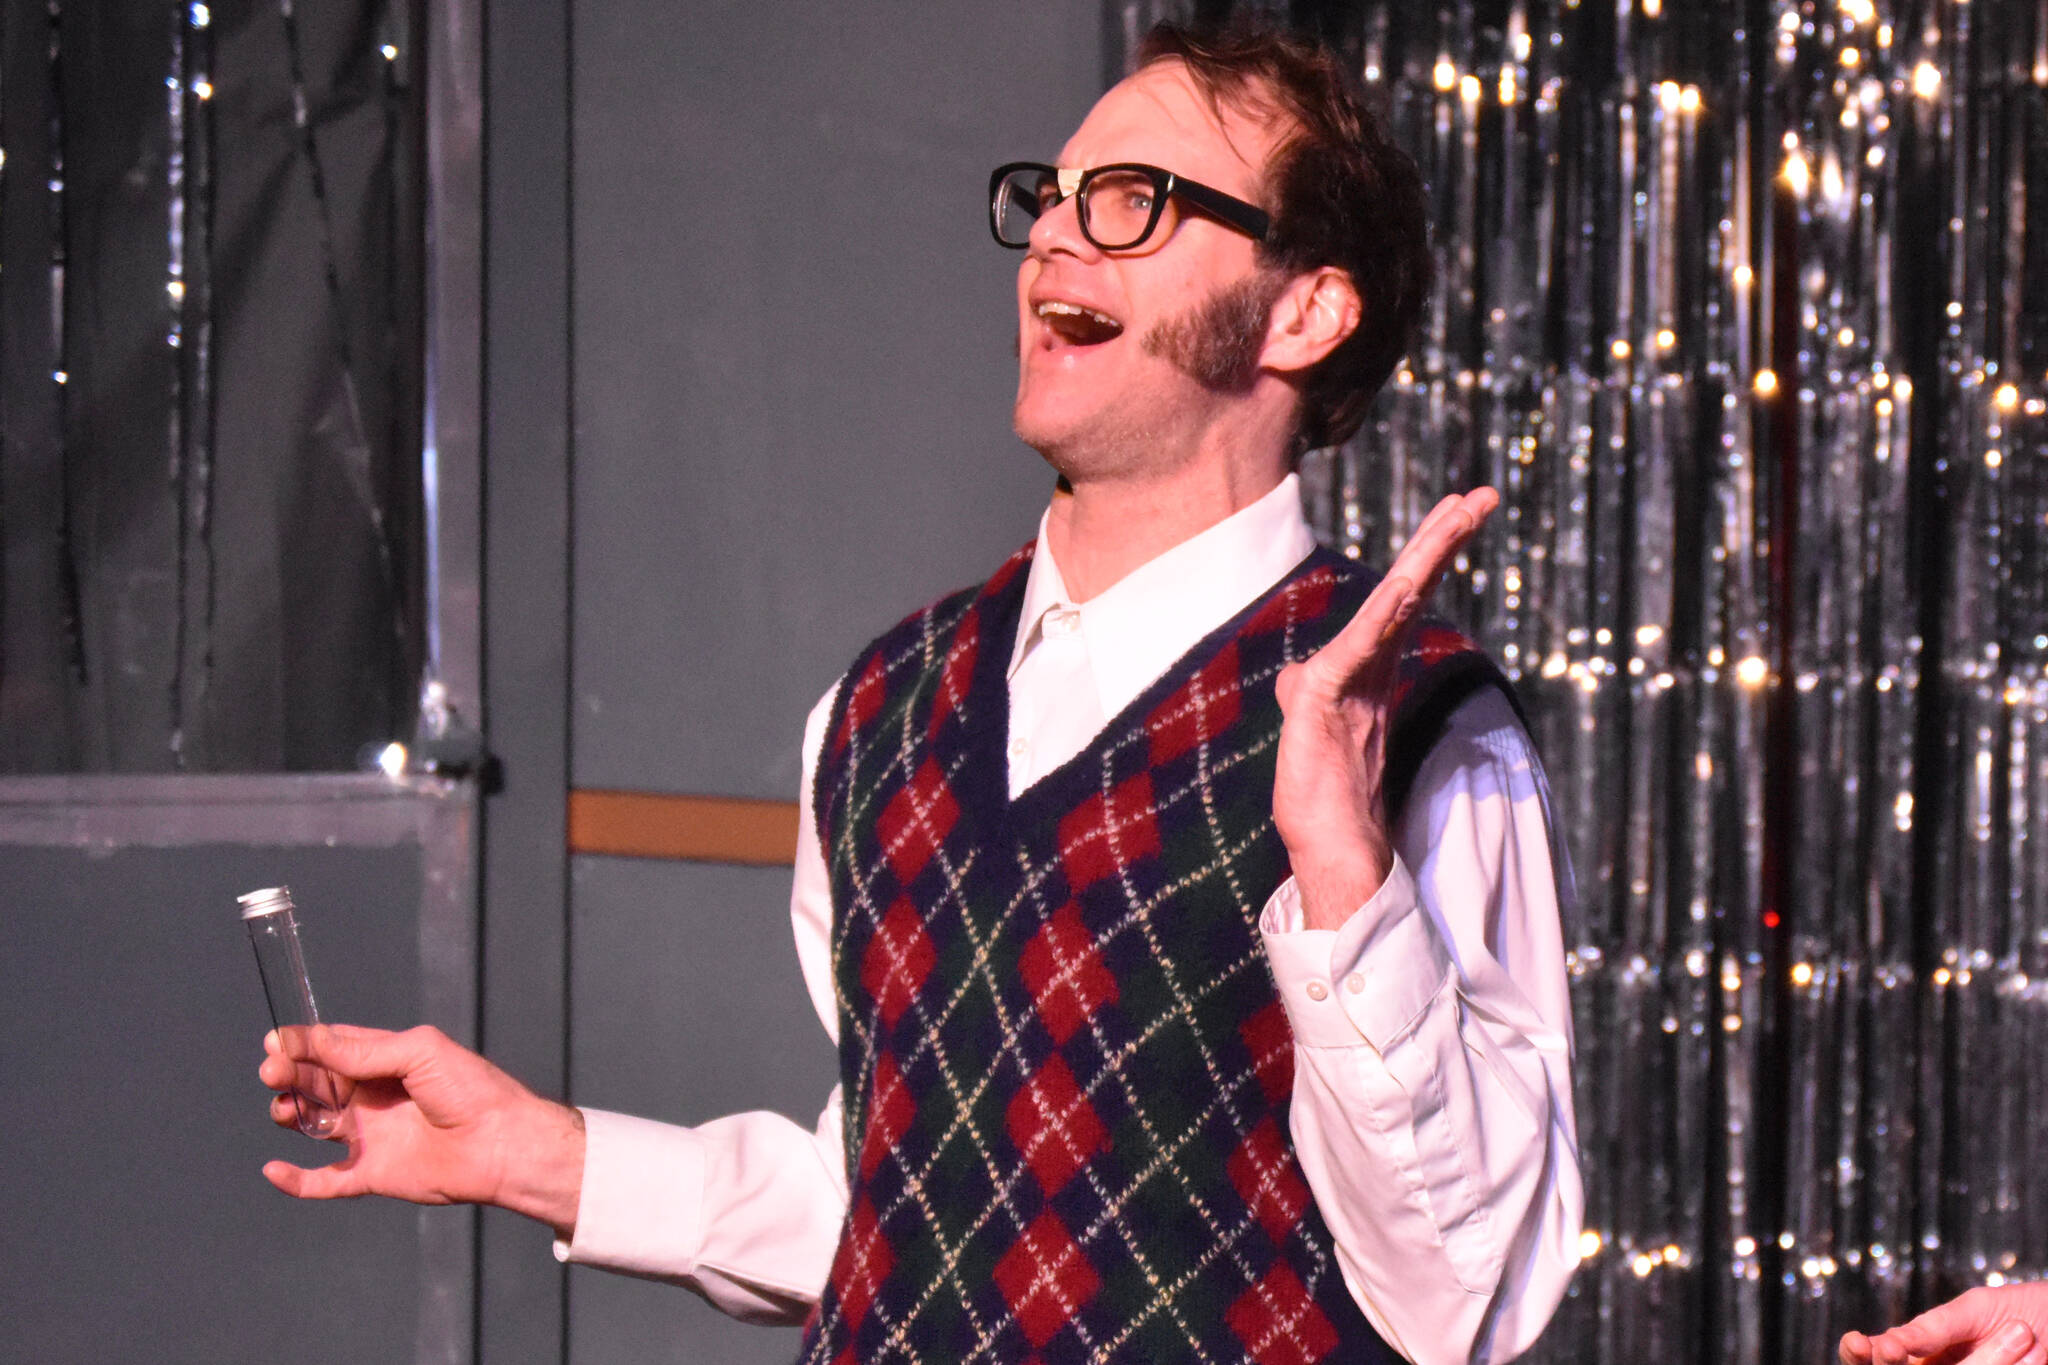 Chris Pepper portrays Ted during a rehersal of “Disaster!” on Tuesday, Feb. 21, 2023, at the Kenai Performers’ Theater in Soldotna, Alaska. (Jake Dye/Peninsula Clarion)